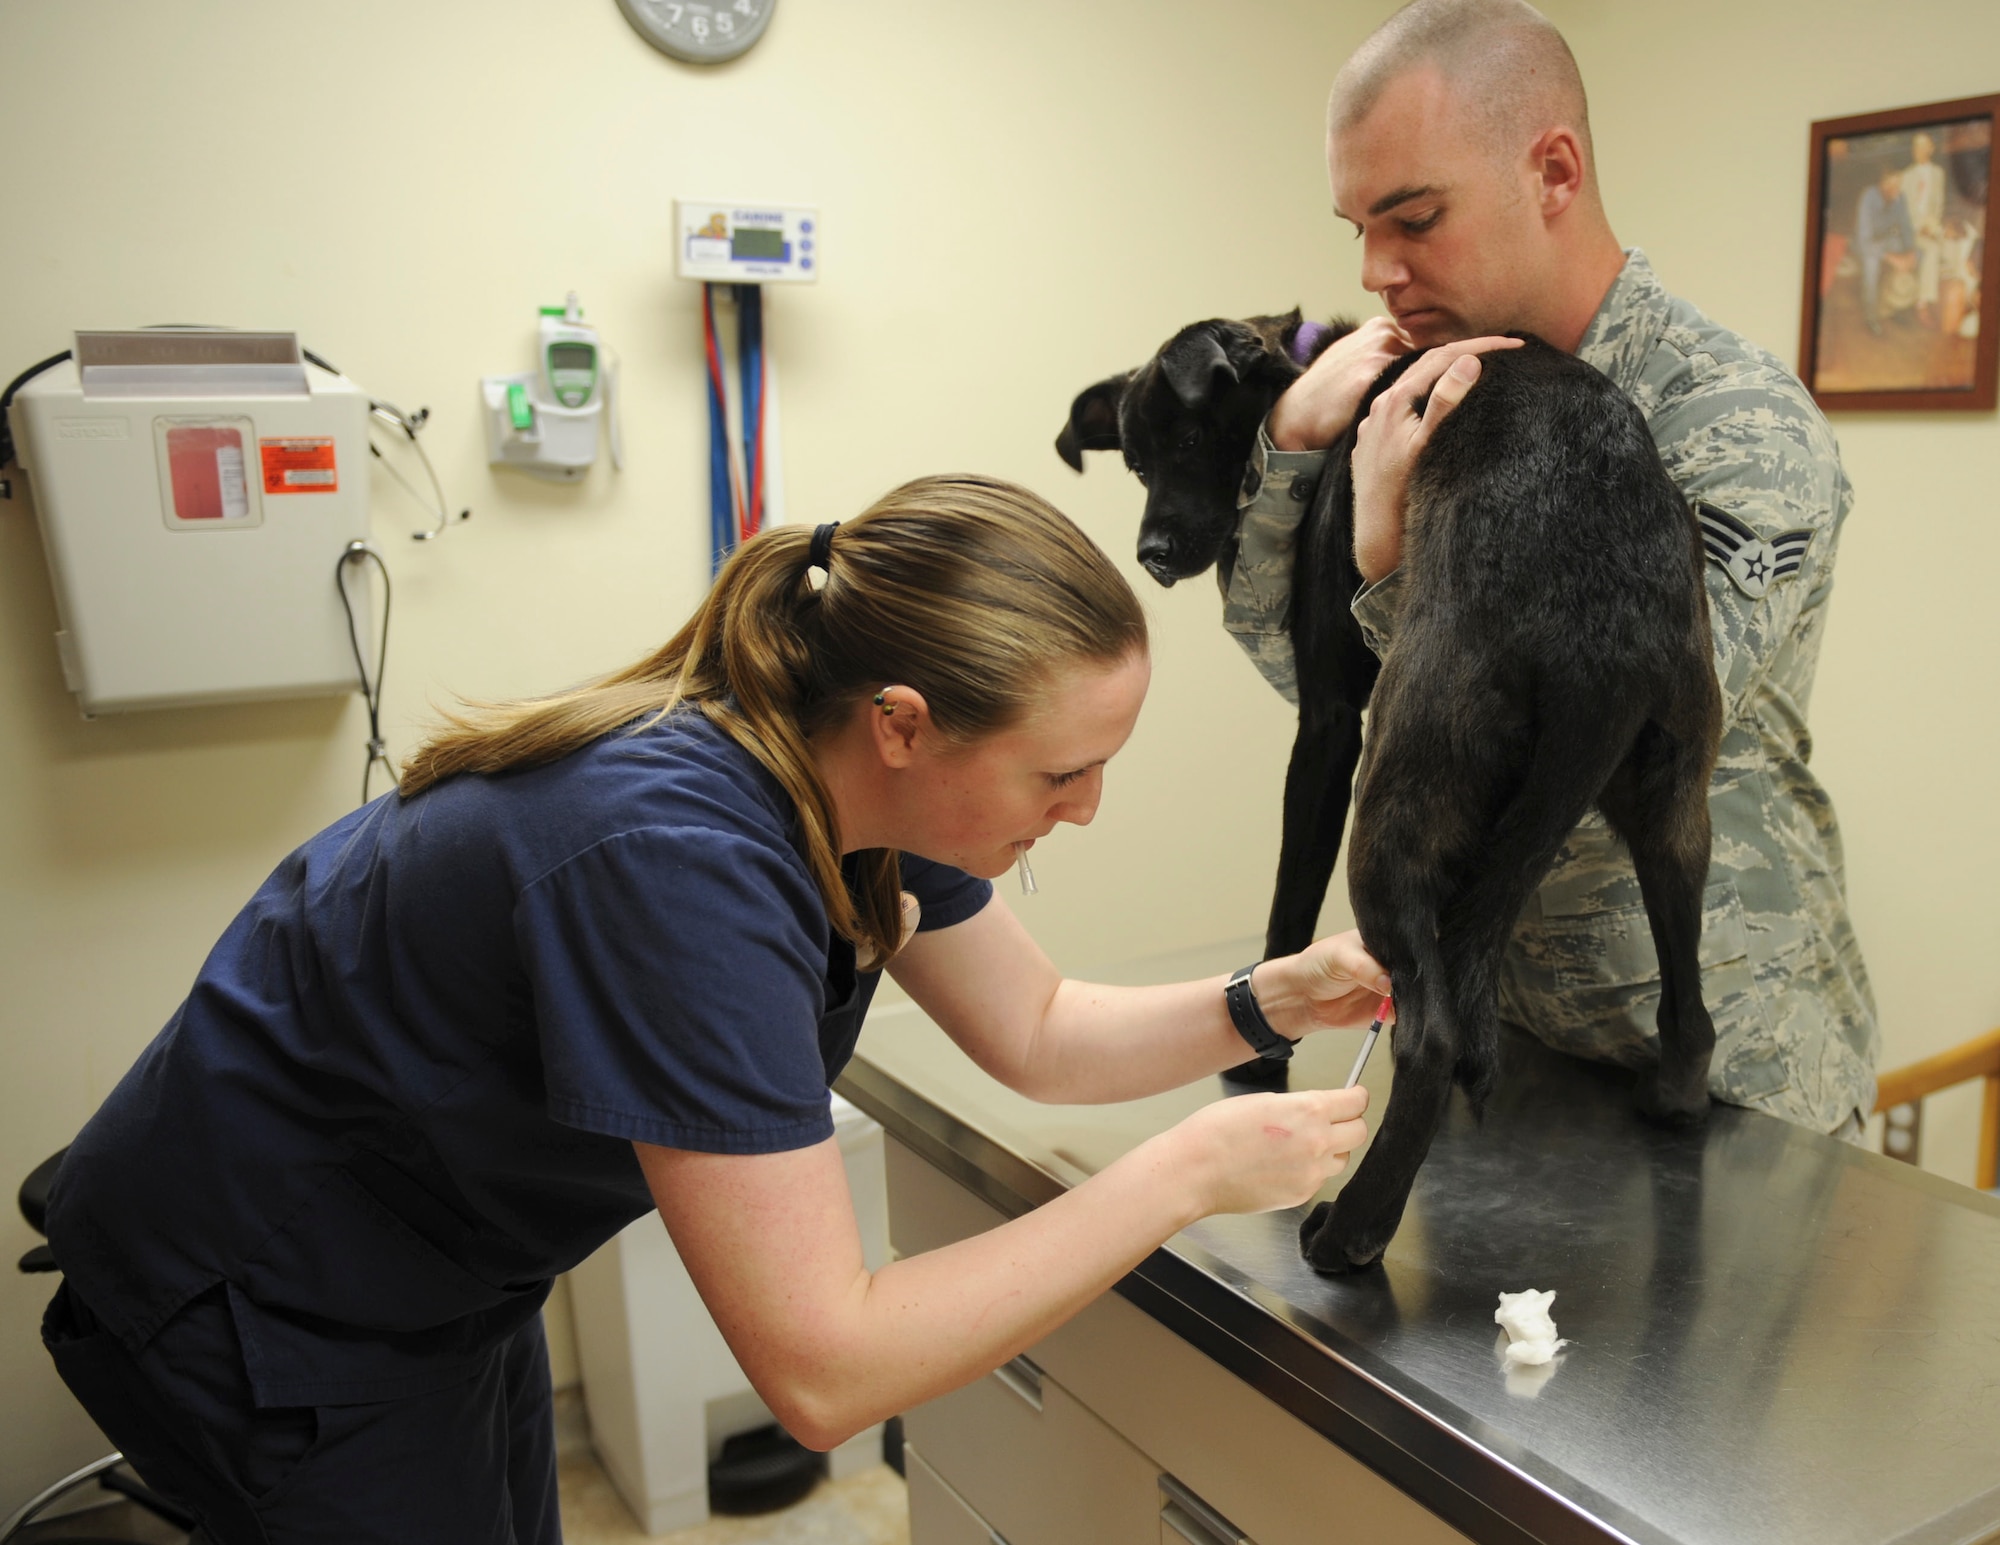 U.S. Air Force Senior Airman Matthew Reynolds, 23d Civil Engineer Squadron structural journeyman, holds Dakota while Andie Rogers, veterinarian technician, takes blood during her first annual checkup at the Veterinary Treatment Facility at Moody Air Force Base, Ga., March 12, 2013. The blood sample was used to check for heartworm disease or any abnormalities in her blood. (U.S. Air Force photo by Airman 1st Class Olivia Bumpers/Released)